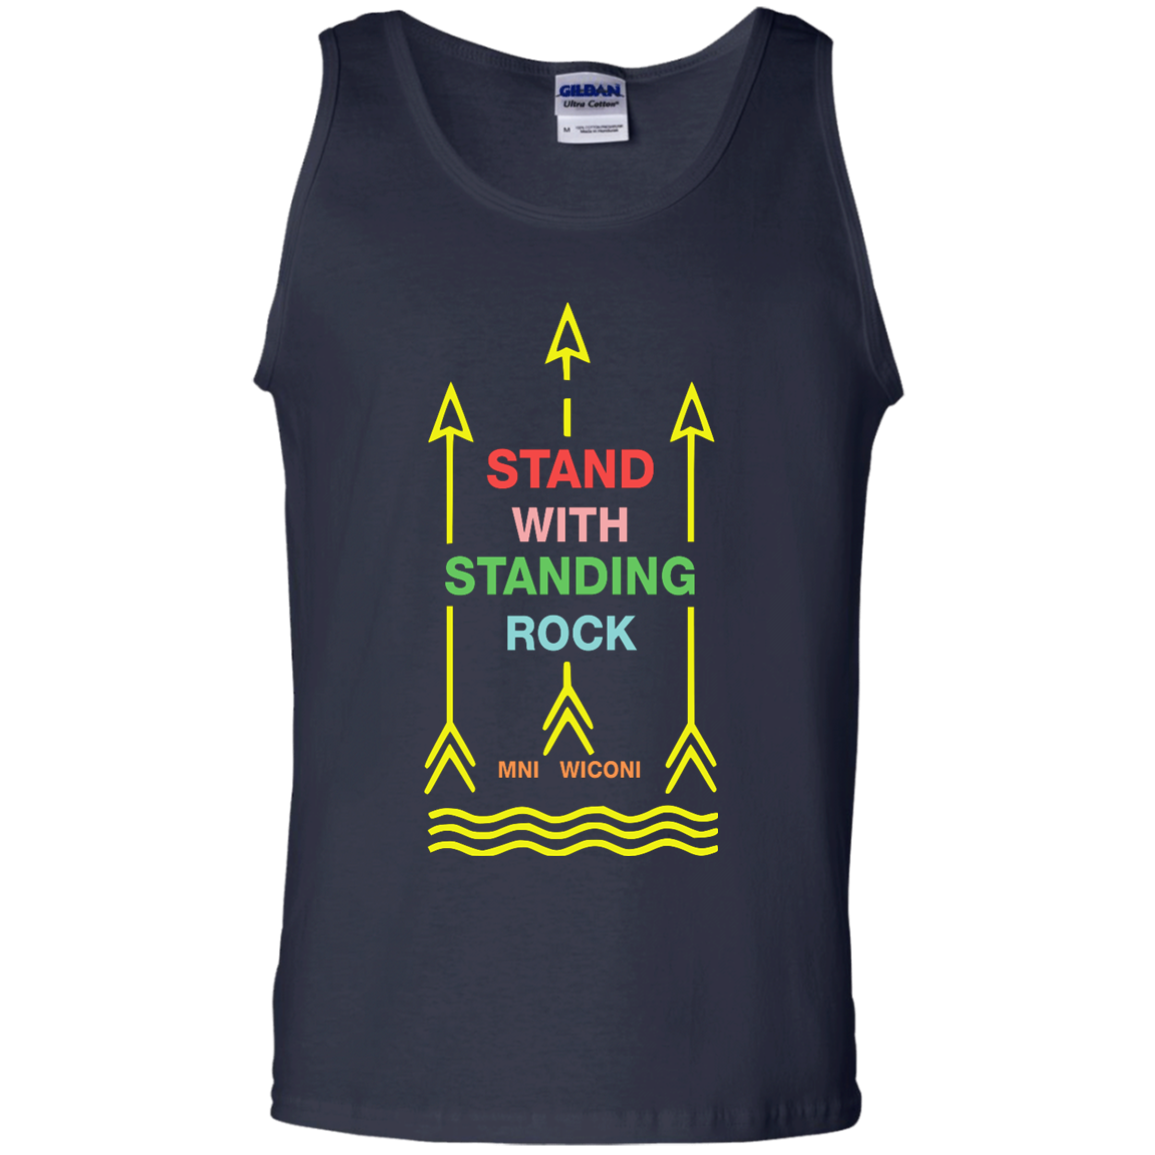 I stand with standing rock, MNI WICONI Shirt - ifrogtees